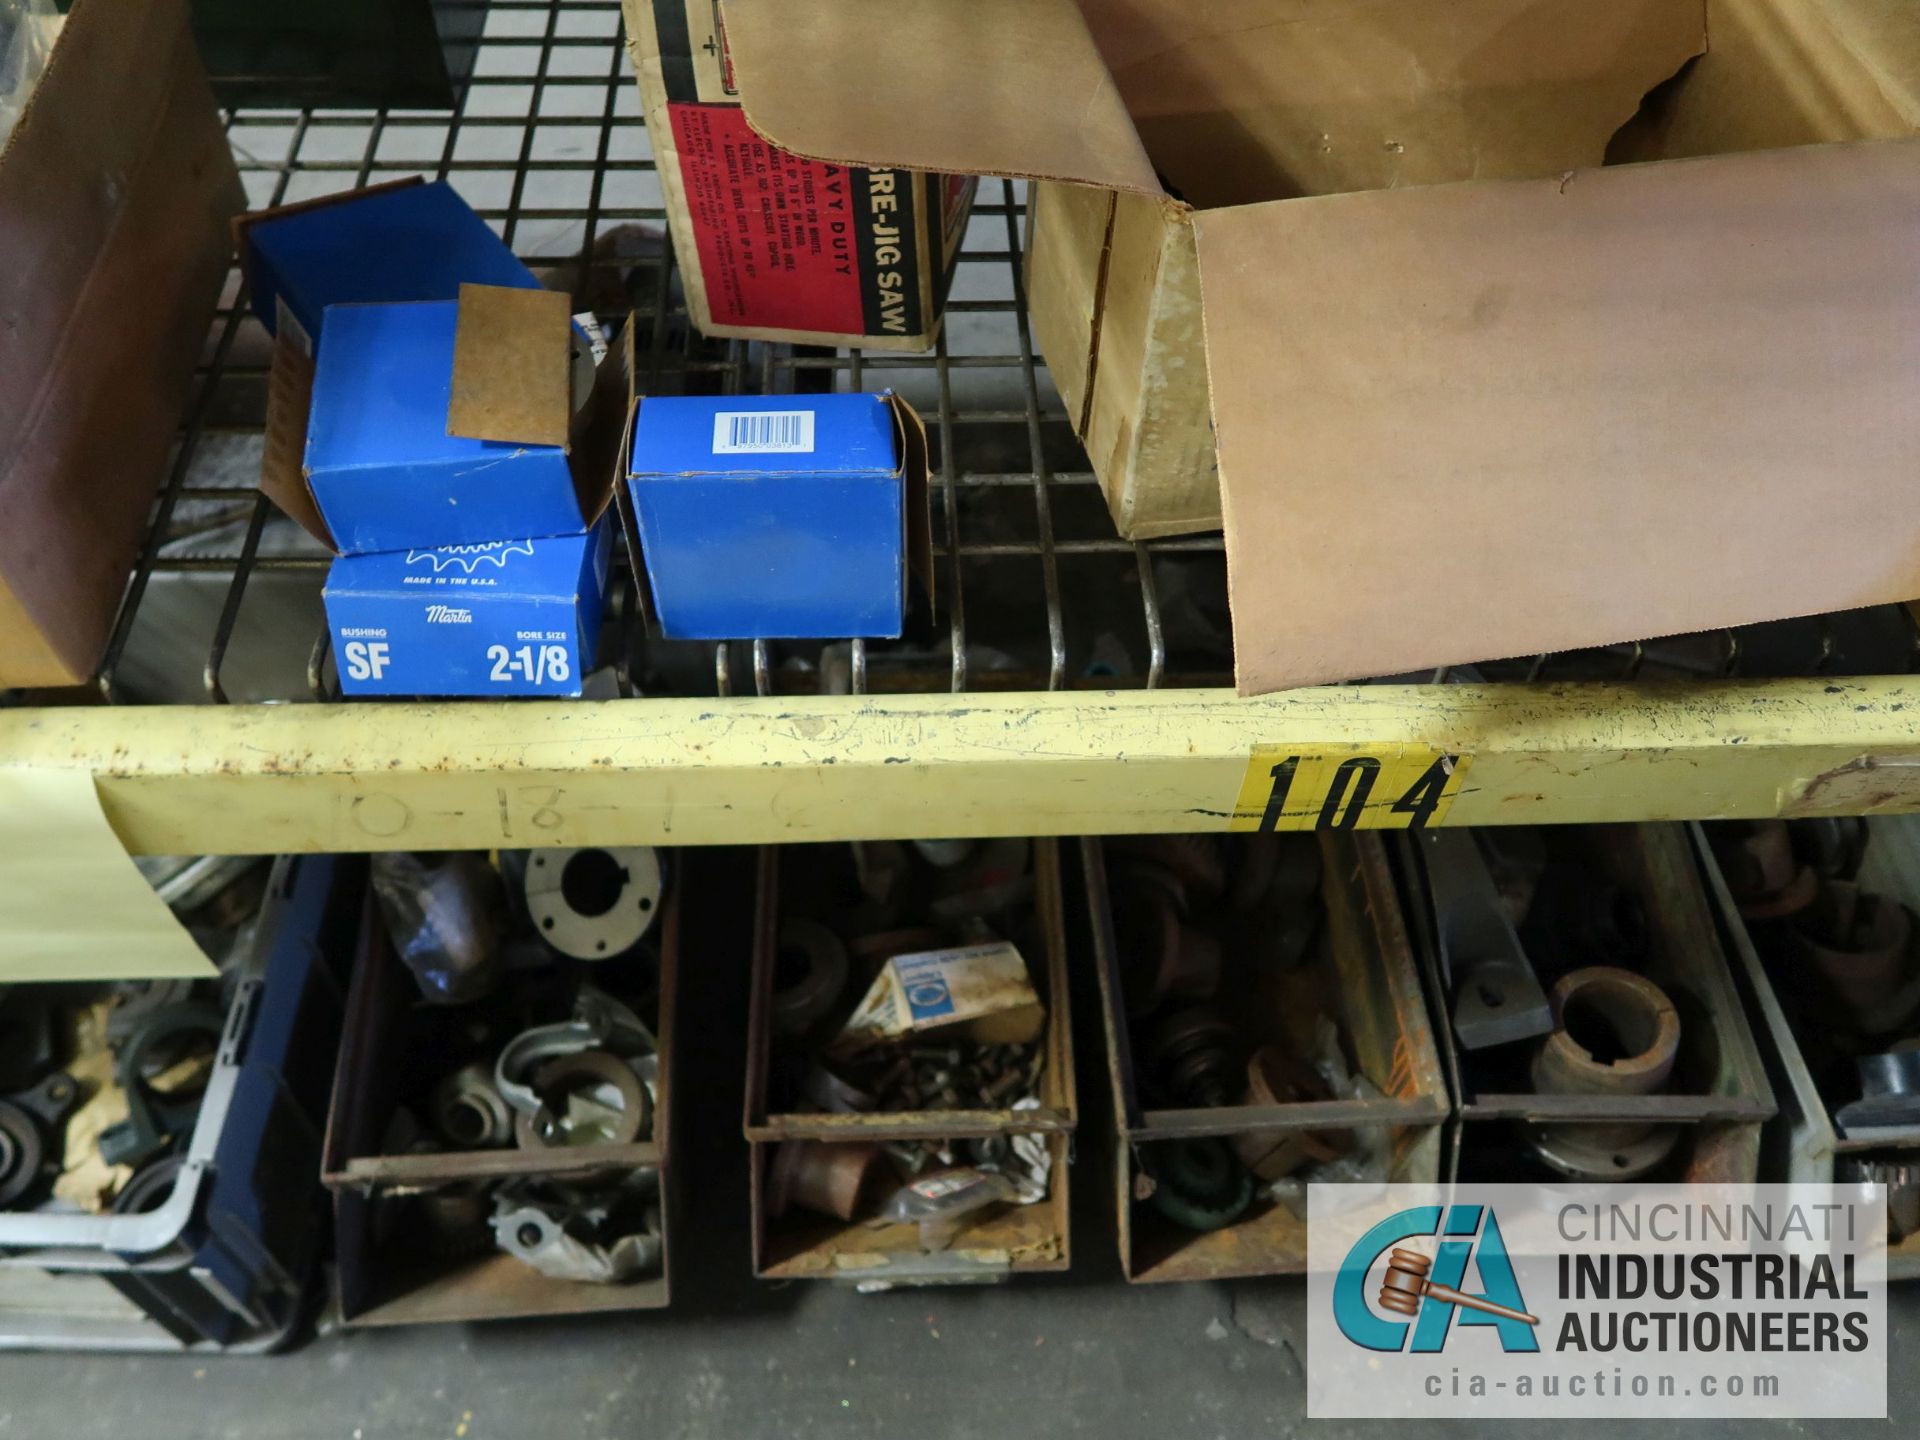 (LOT) CONTENTS OF (1) SECTION RACK GEARS, MOTORS, ELECTRICAL - Image 3 of 10